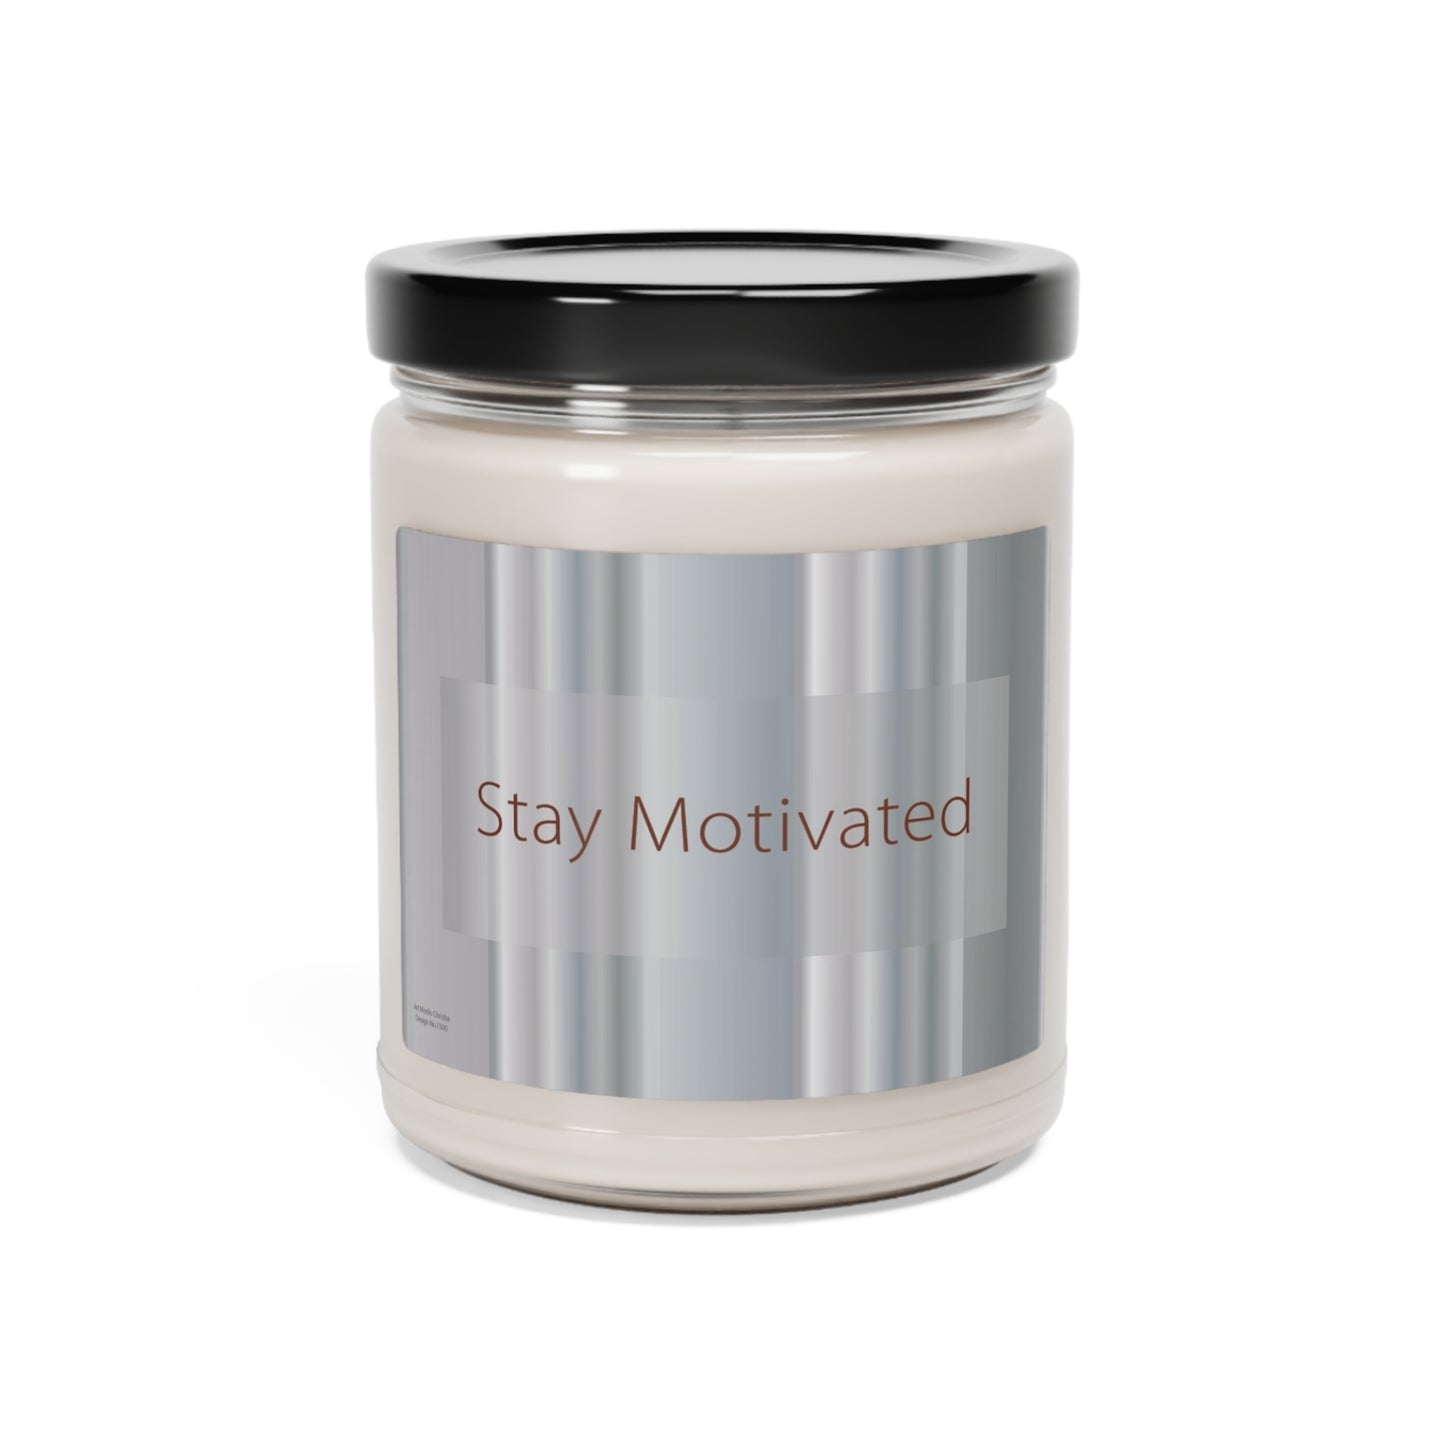 Scented Soy Candle, 9oz Stay Motivated - Design No.1500